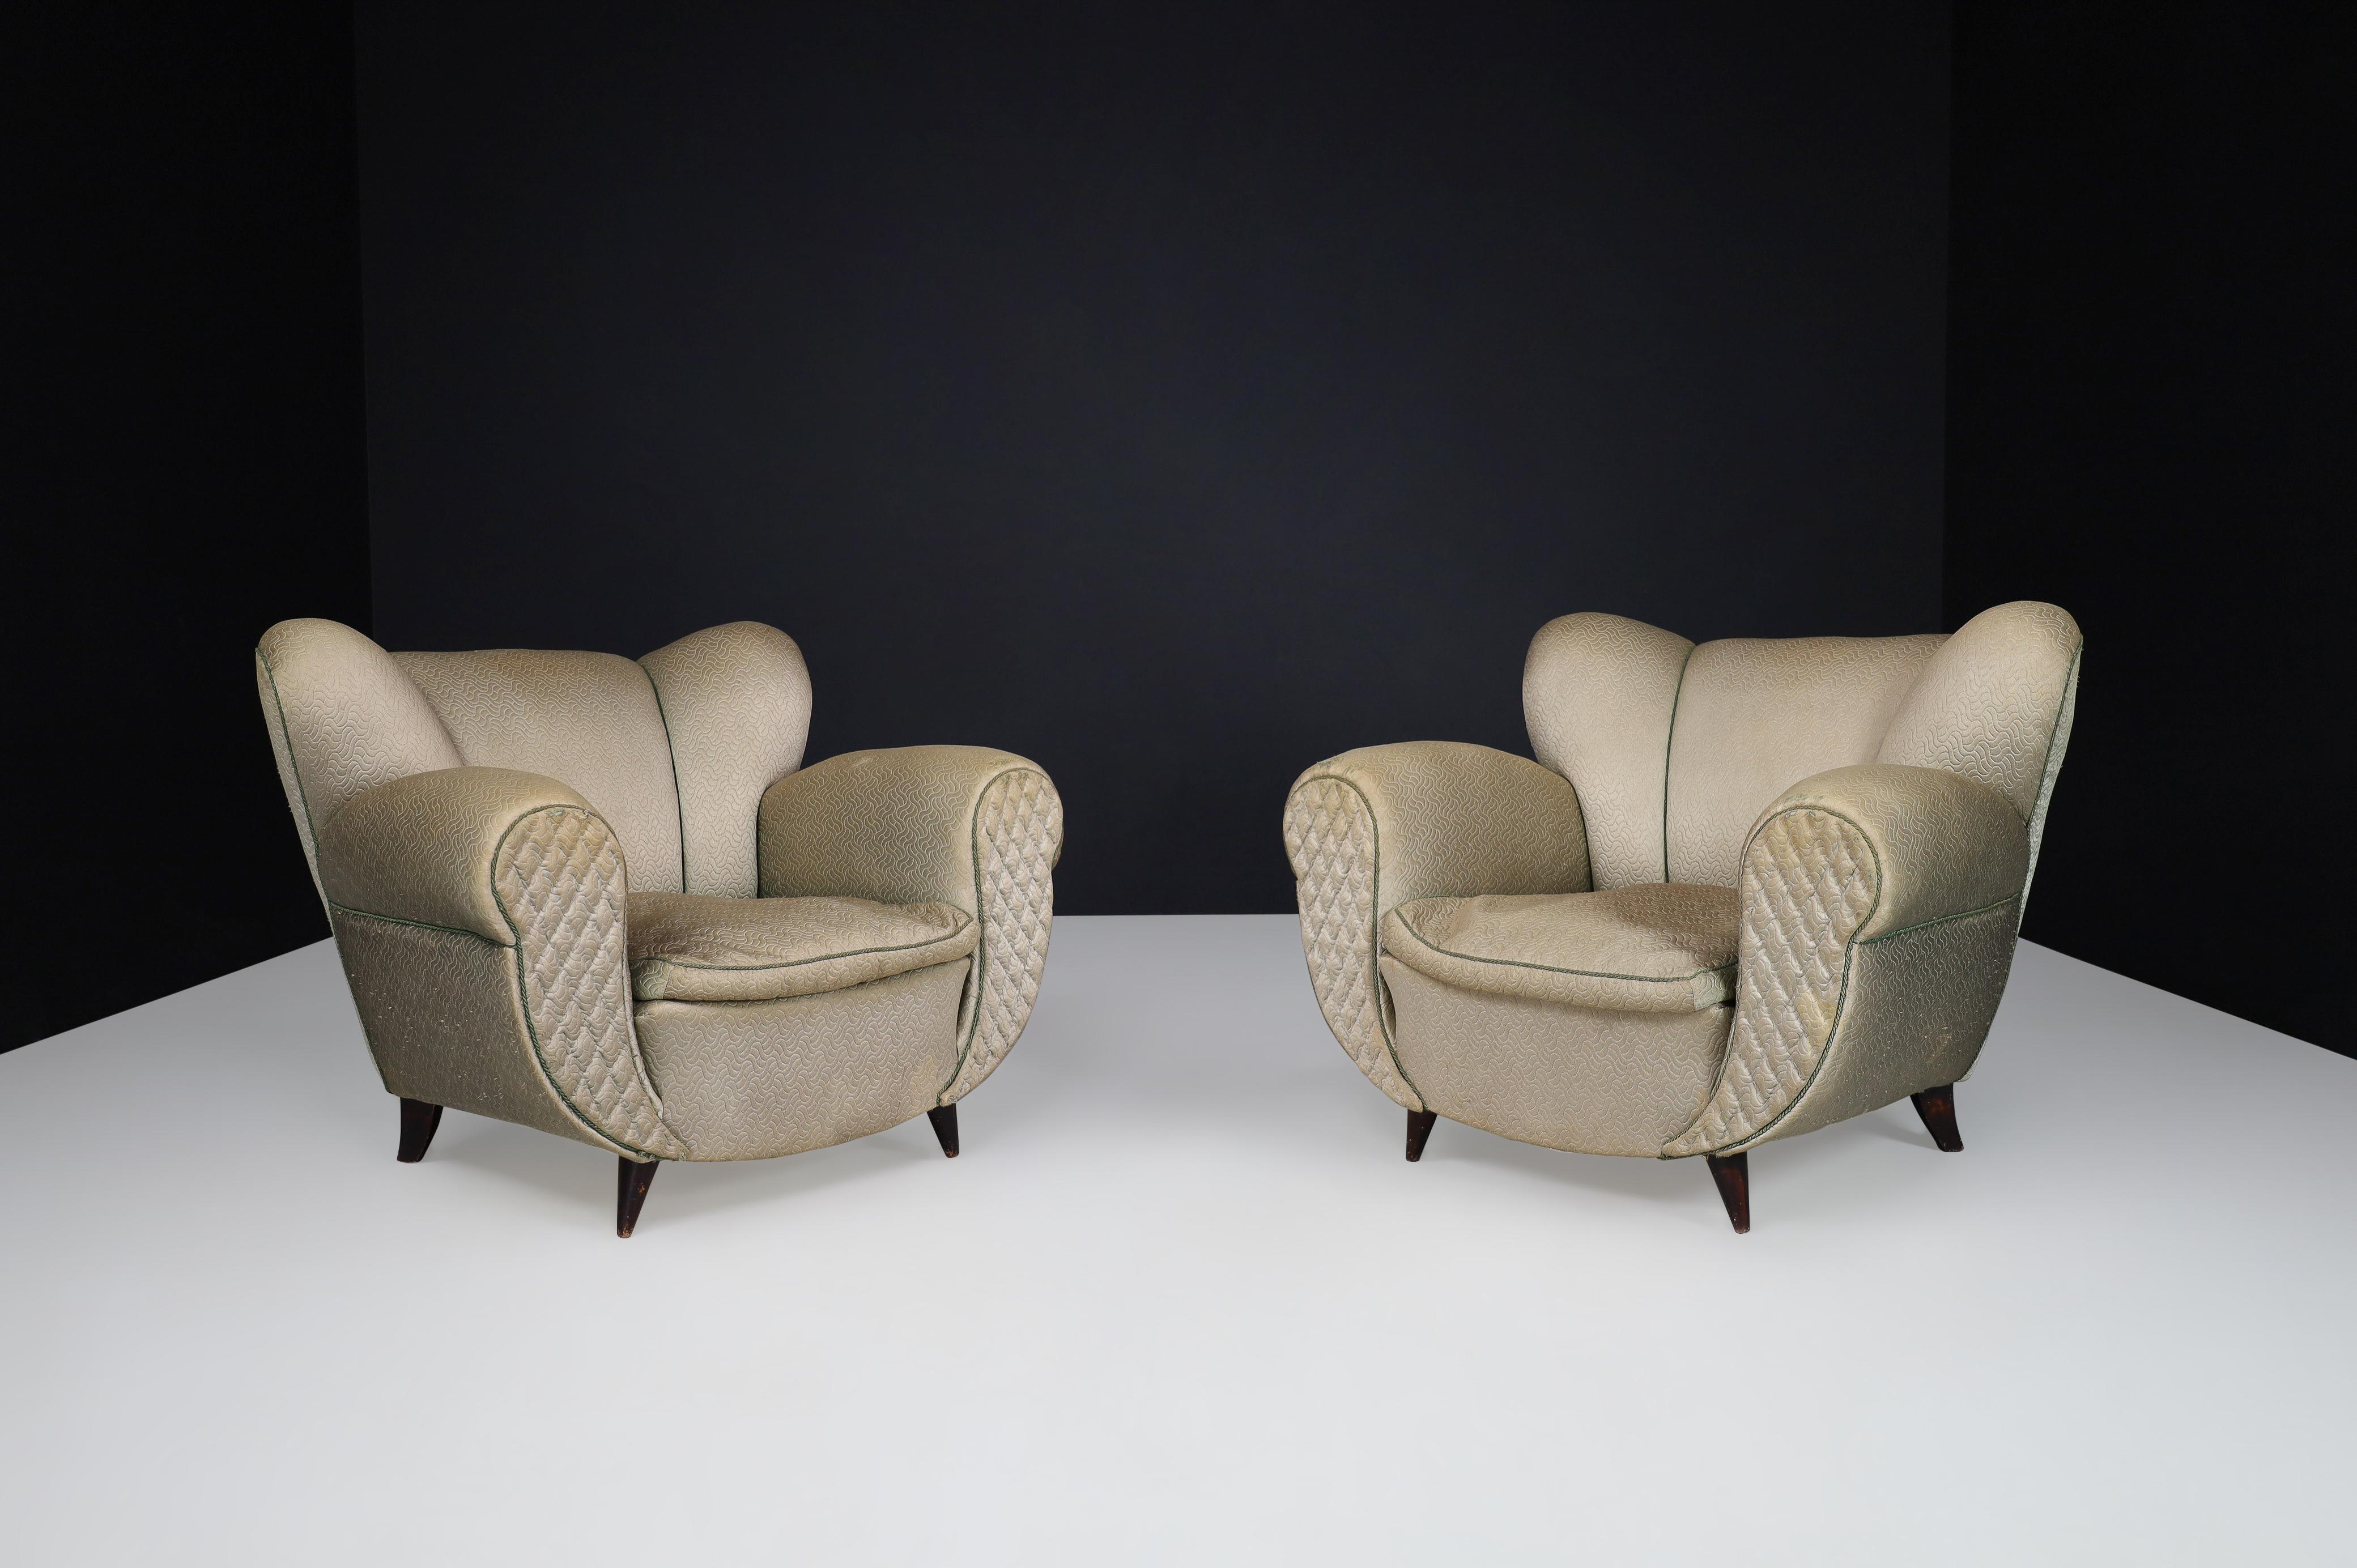 Uglielmo Ulrich Art Deco Lounge Chairs in Original Fabric, Italy 1930s For Sale 4